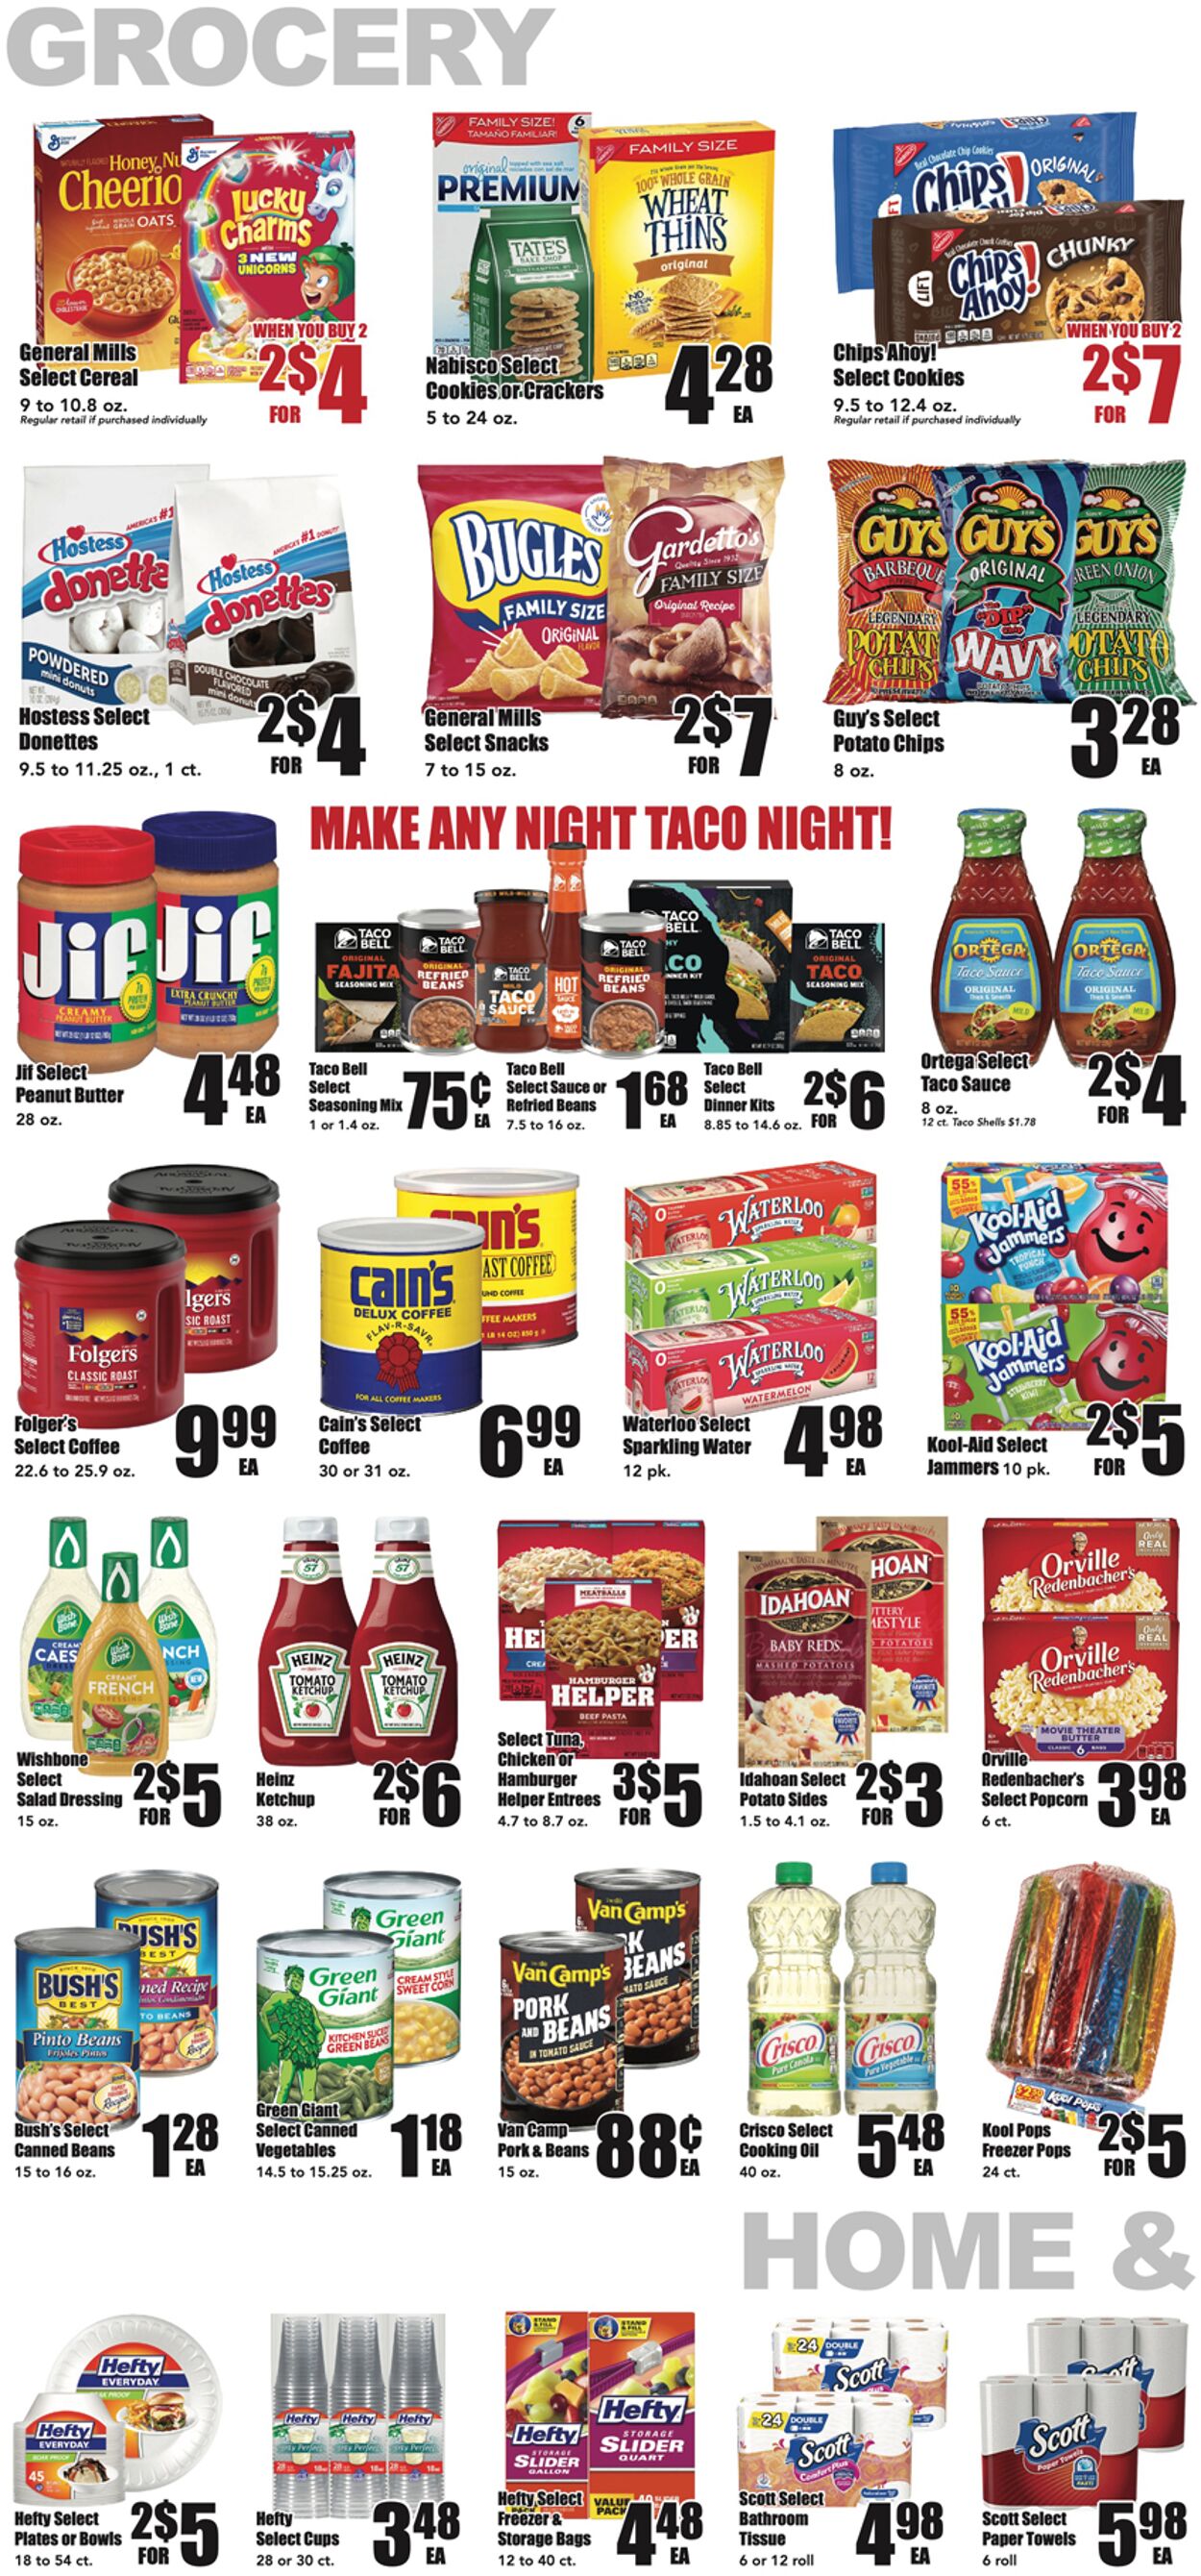 Warehouse Market Ad from 04/19/2023